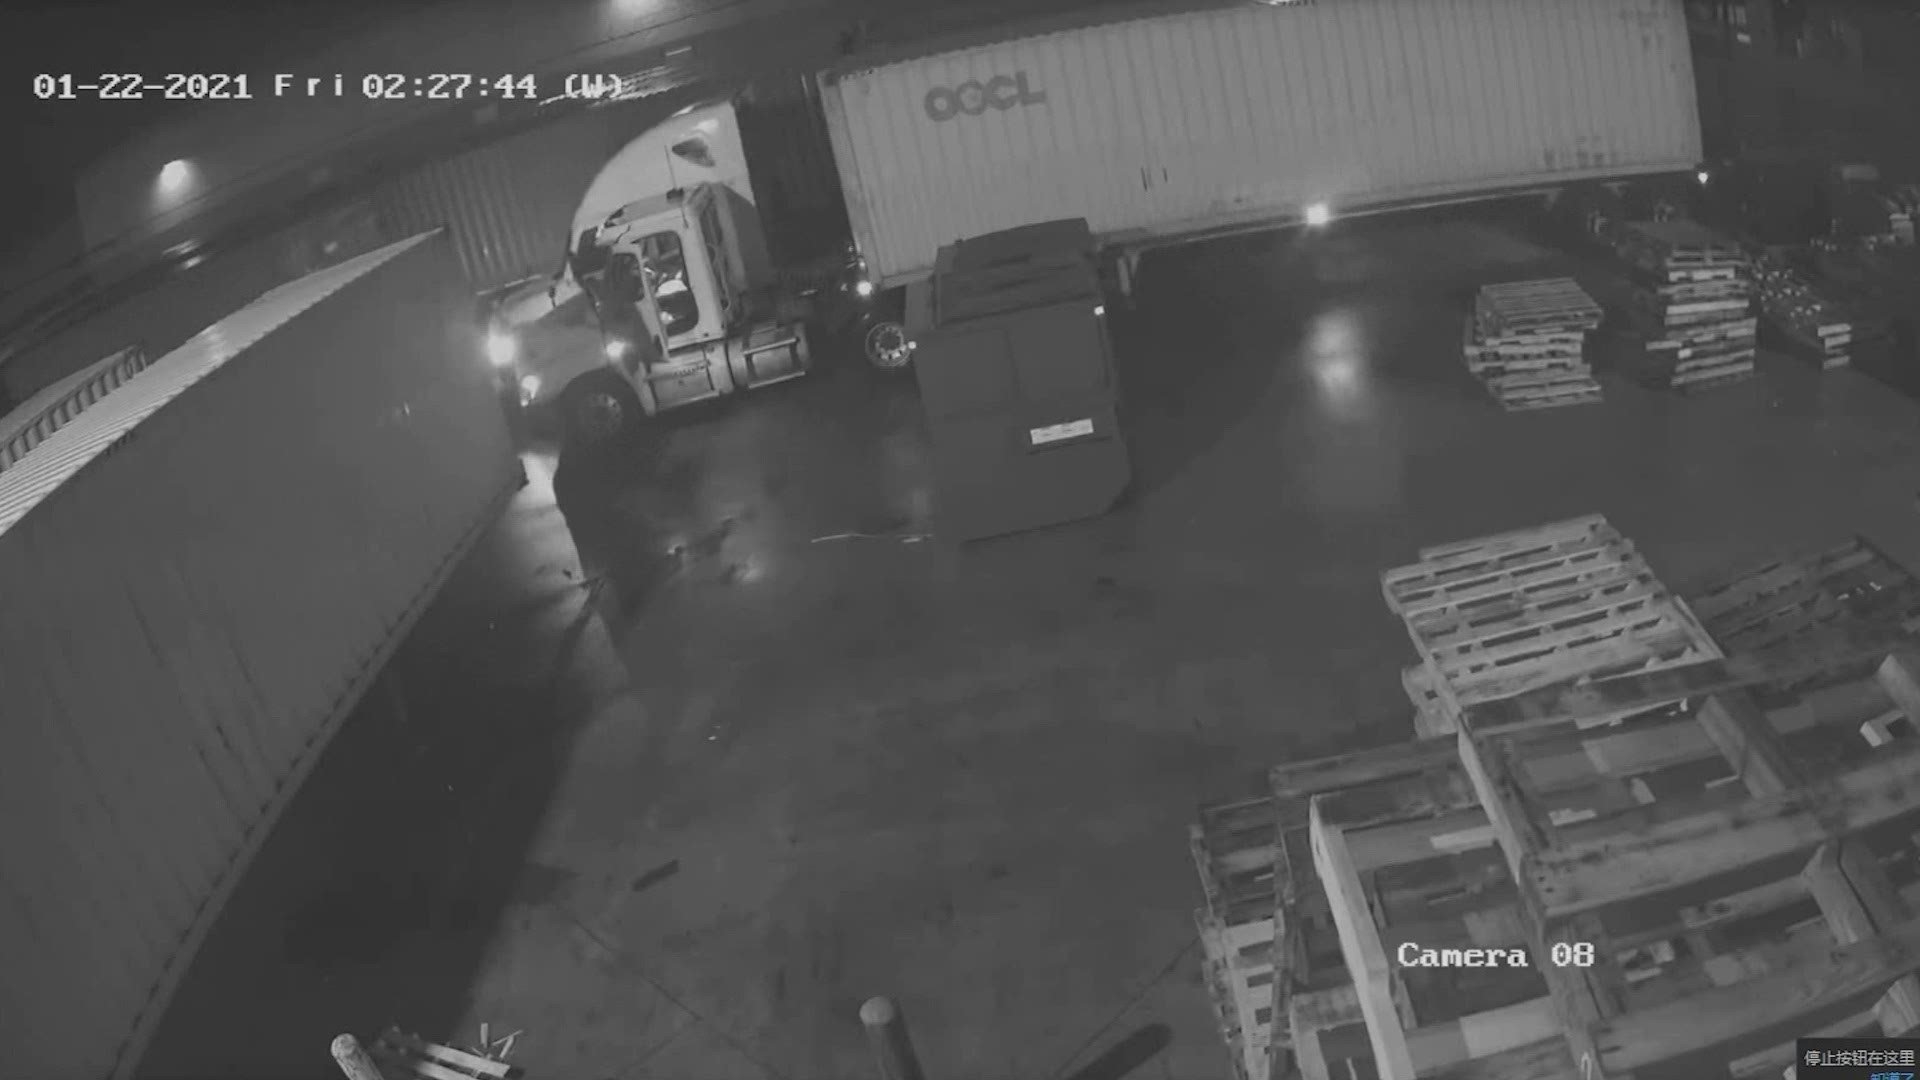 Security cameras captured images of four semi trucks entering the grounds of the GoTrax warehouse and leaving with trailers full of scooters and hoverboards.